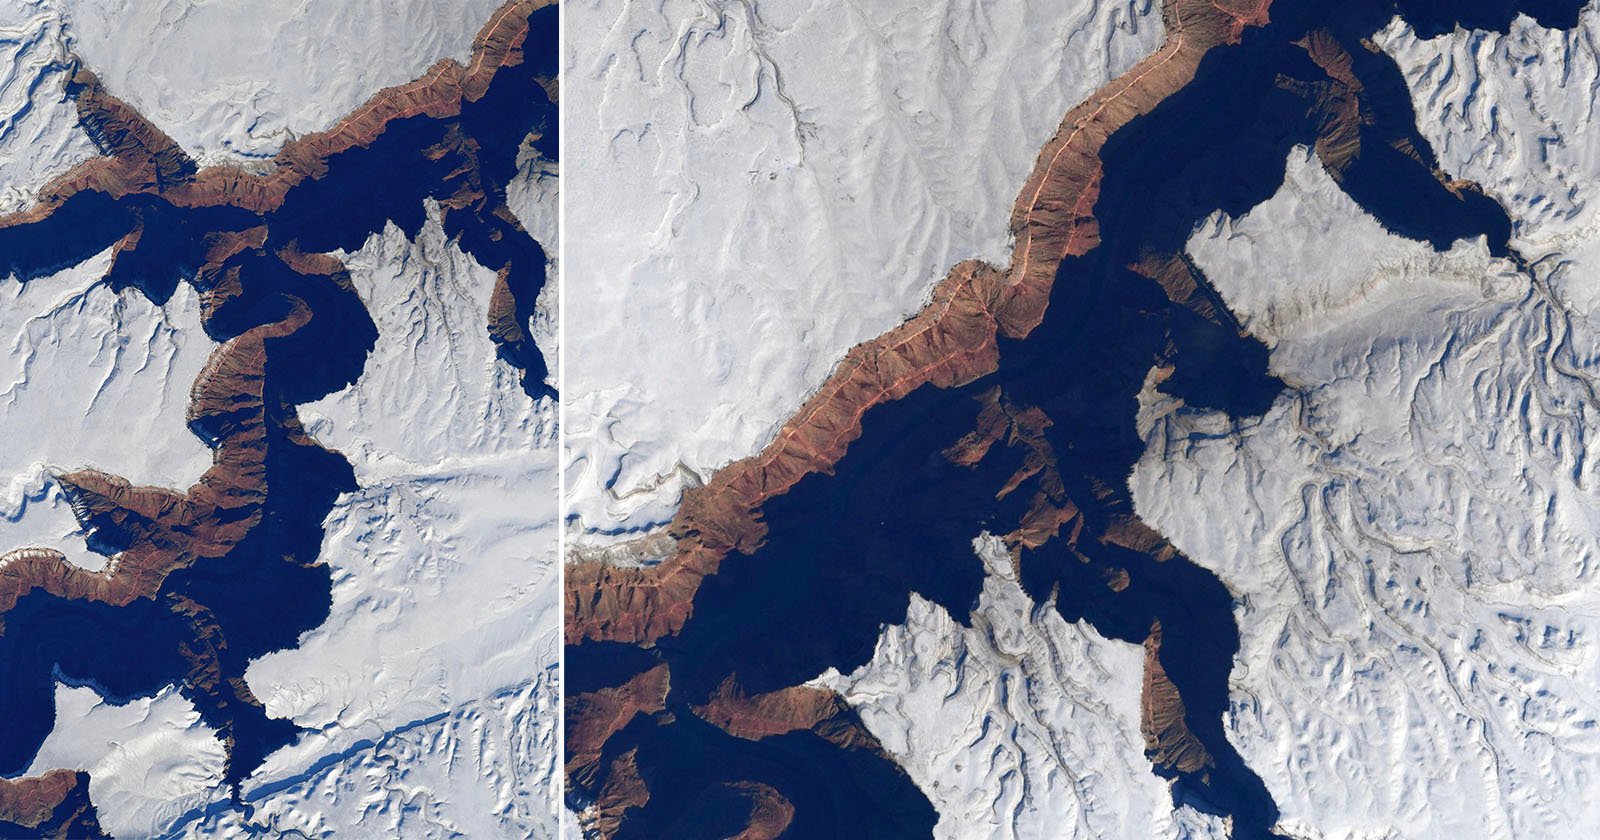 Astronaut Captures Unusual Photos of a Snow-Covered Grand Canyon